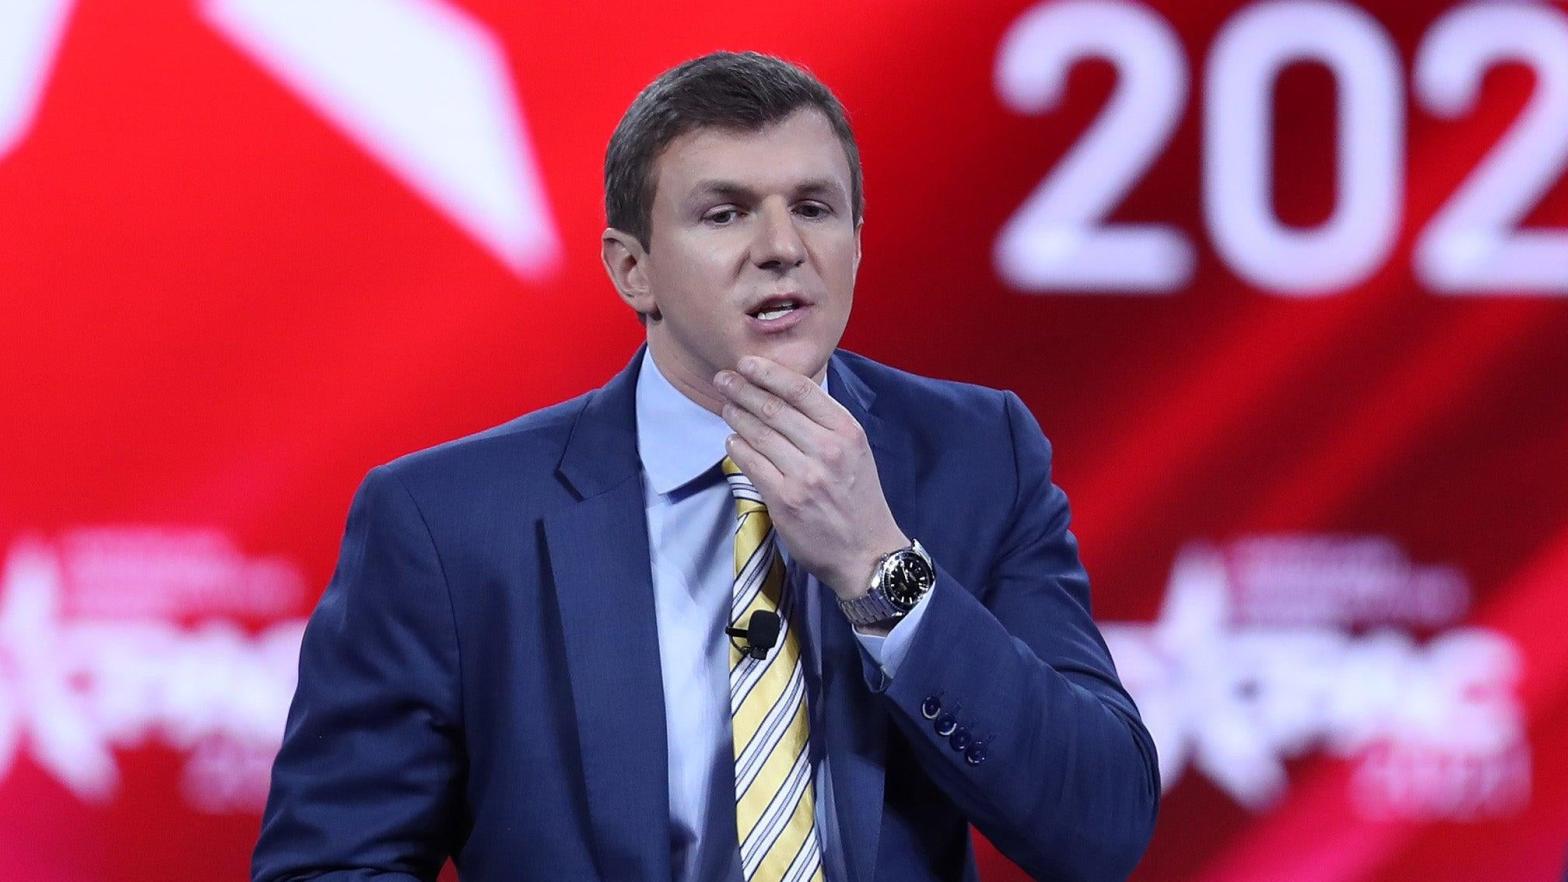 Project Veritas founder James O'Keefe at the Conservative Political Action Conference in Orlando, Florida in 2021. (Photo: Joe Raedle, Getty Images)